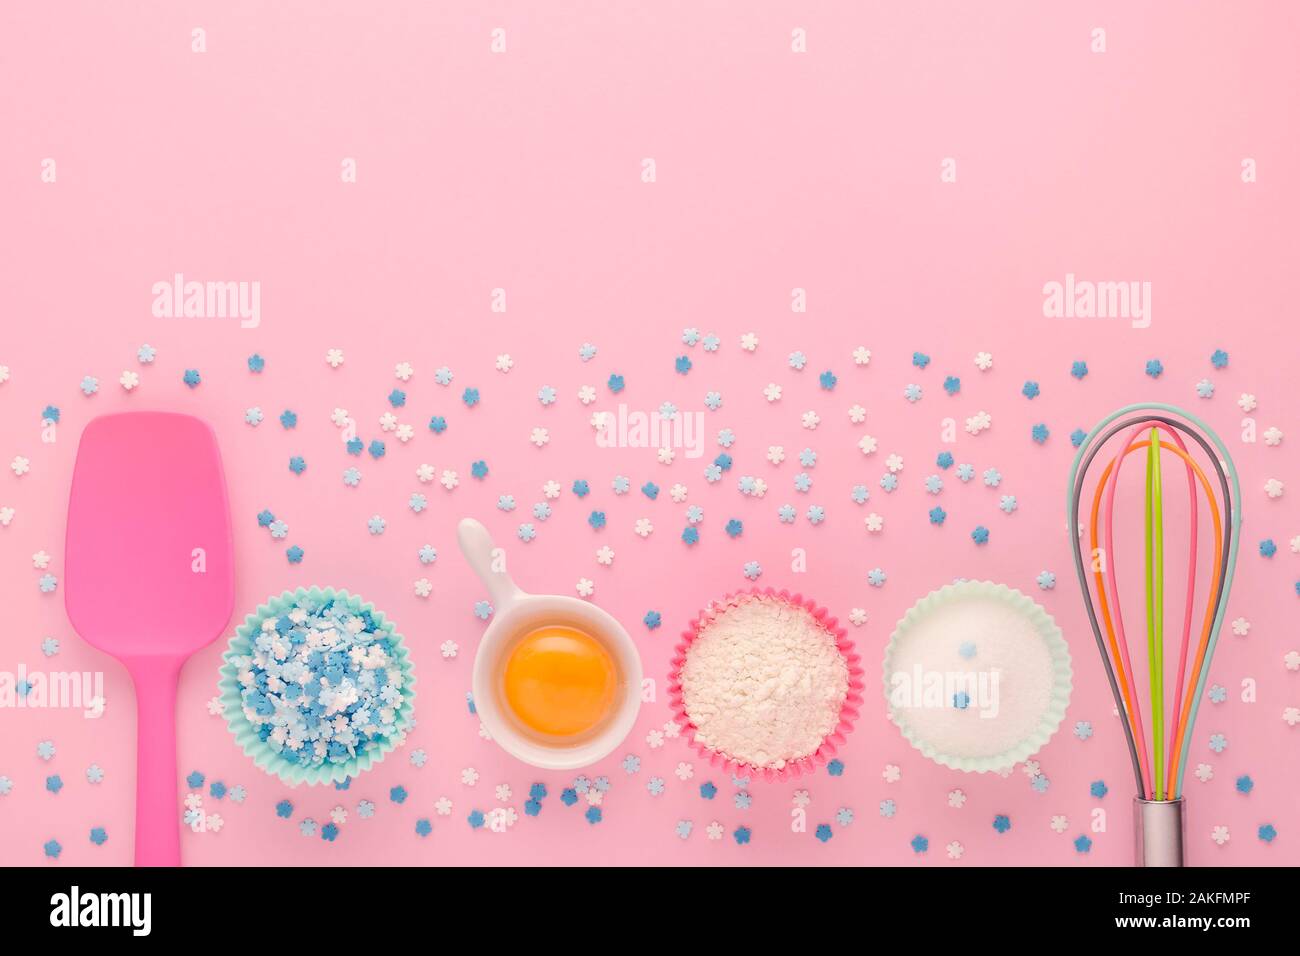 baking ingredients, egg, flour, sugar, sweet decoration and kitchen tools on pink background Stock Photo